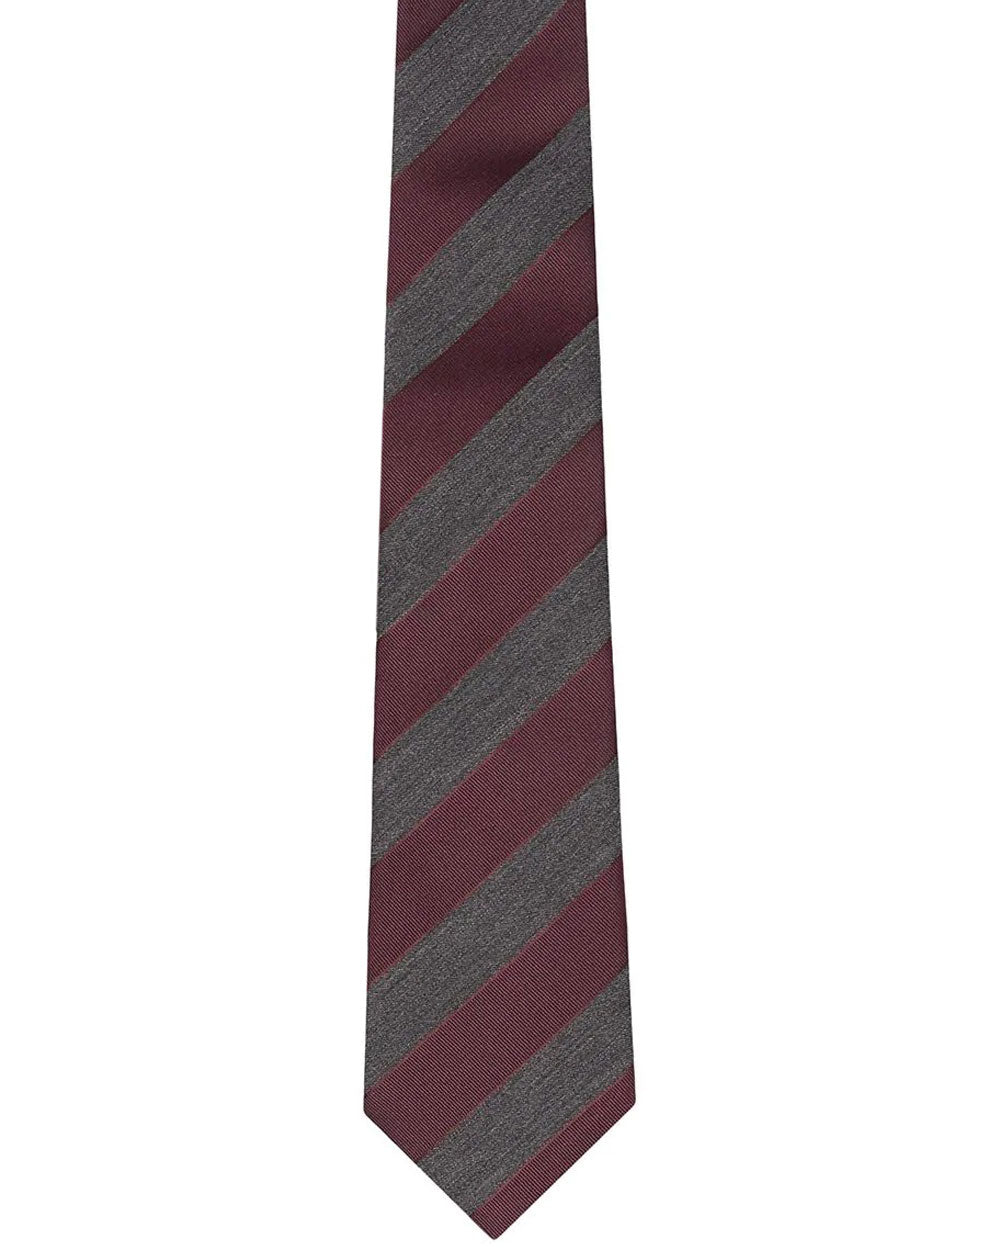 Burgundy and Charcoal Striped Tie